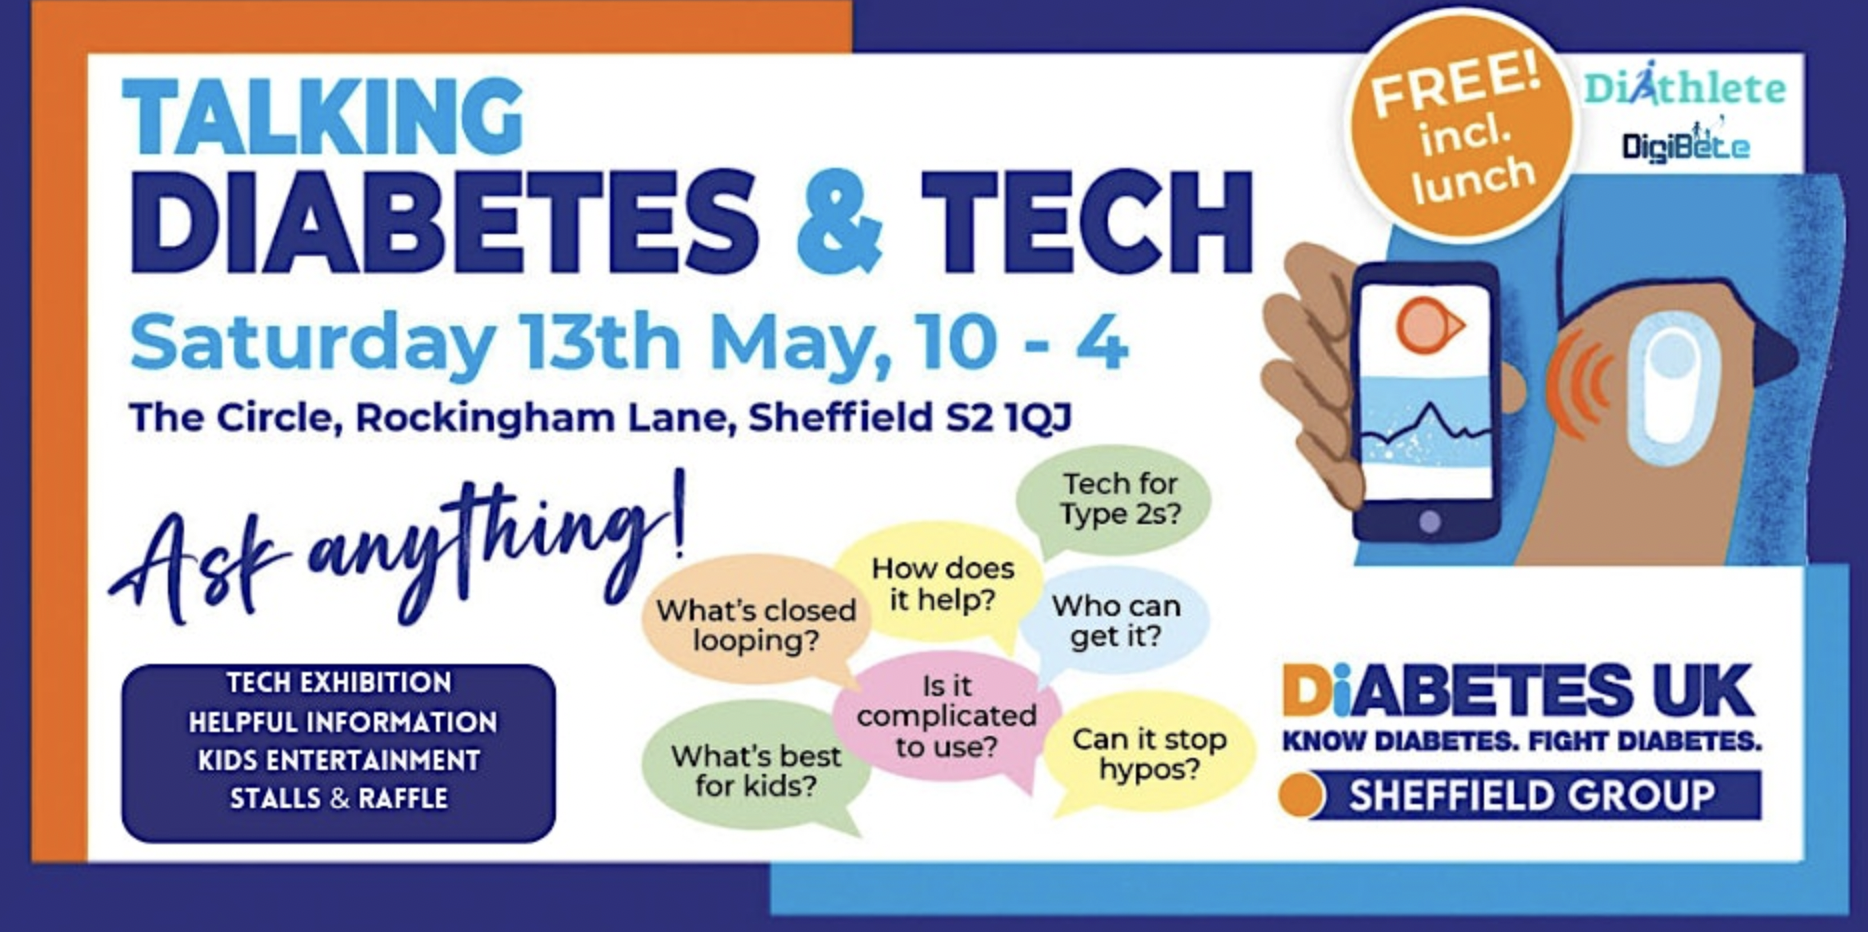 Diabetes UK’s Talking Diabetes and Tech event in Sheffield - This Saturday